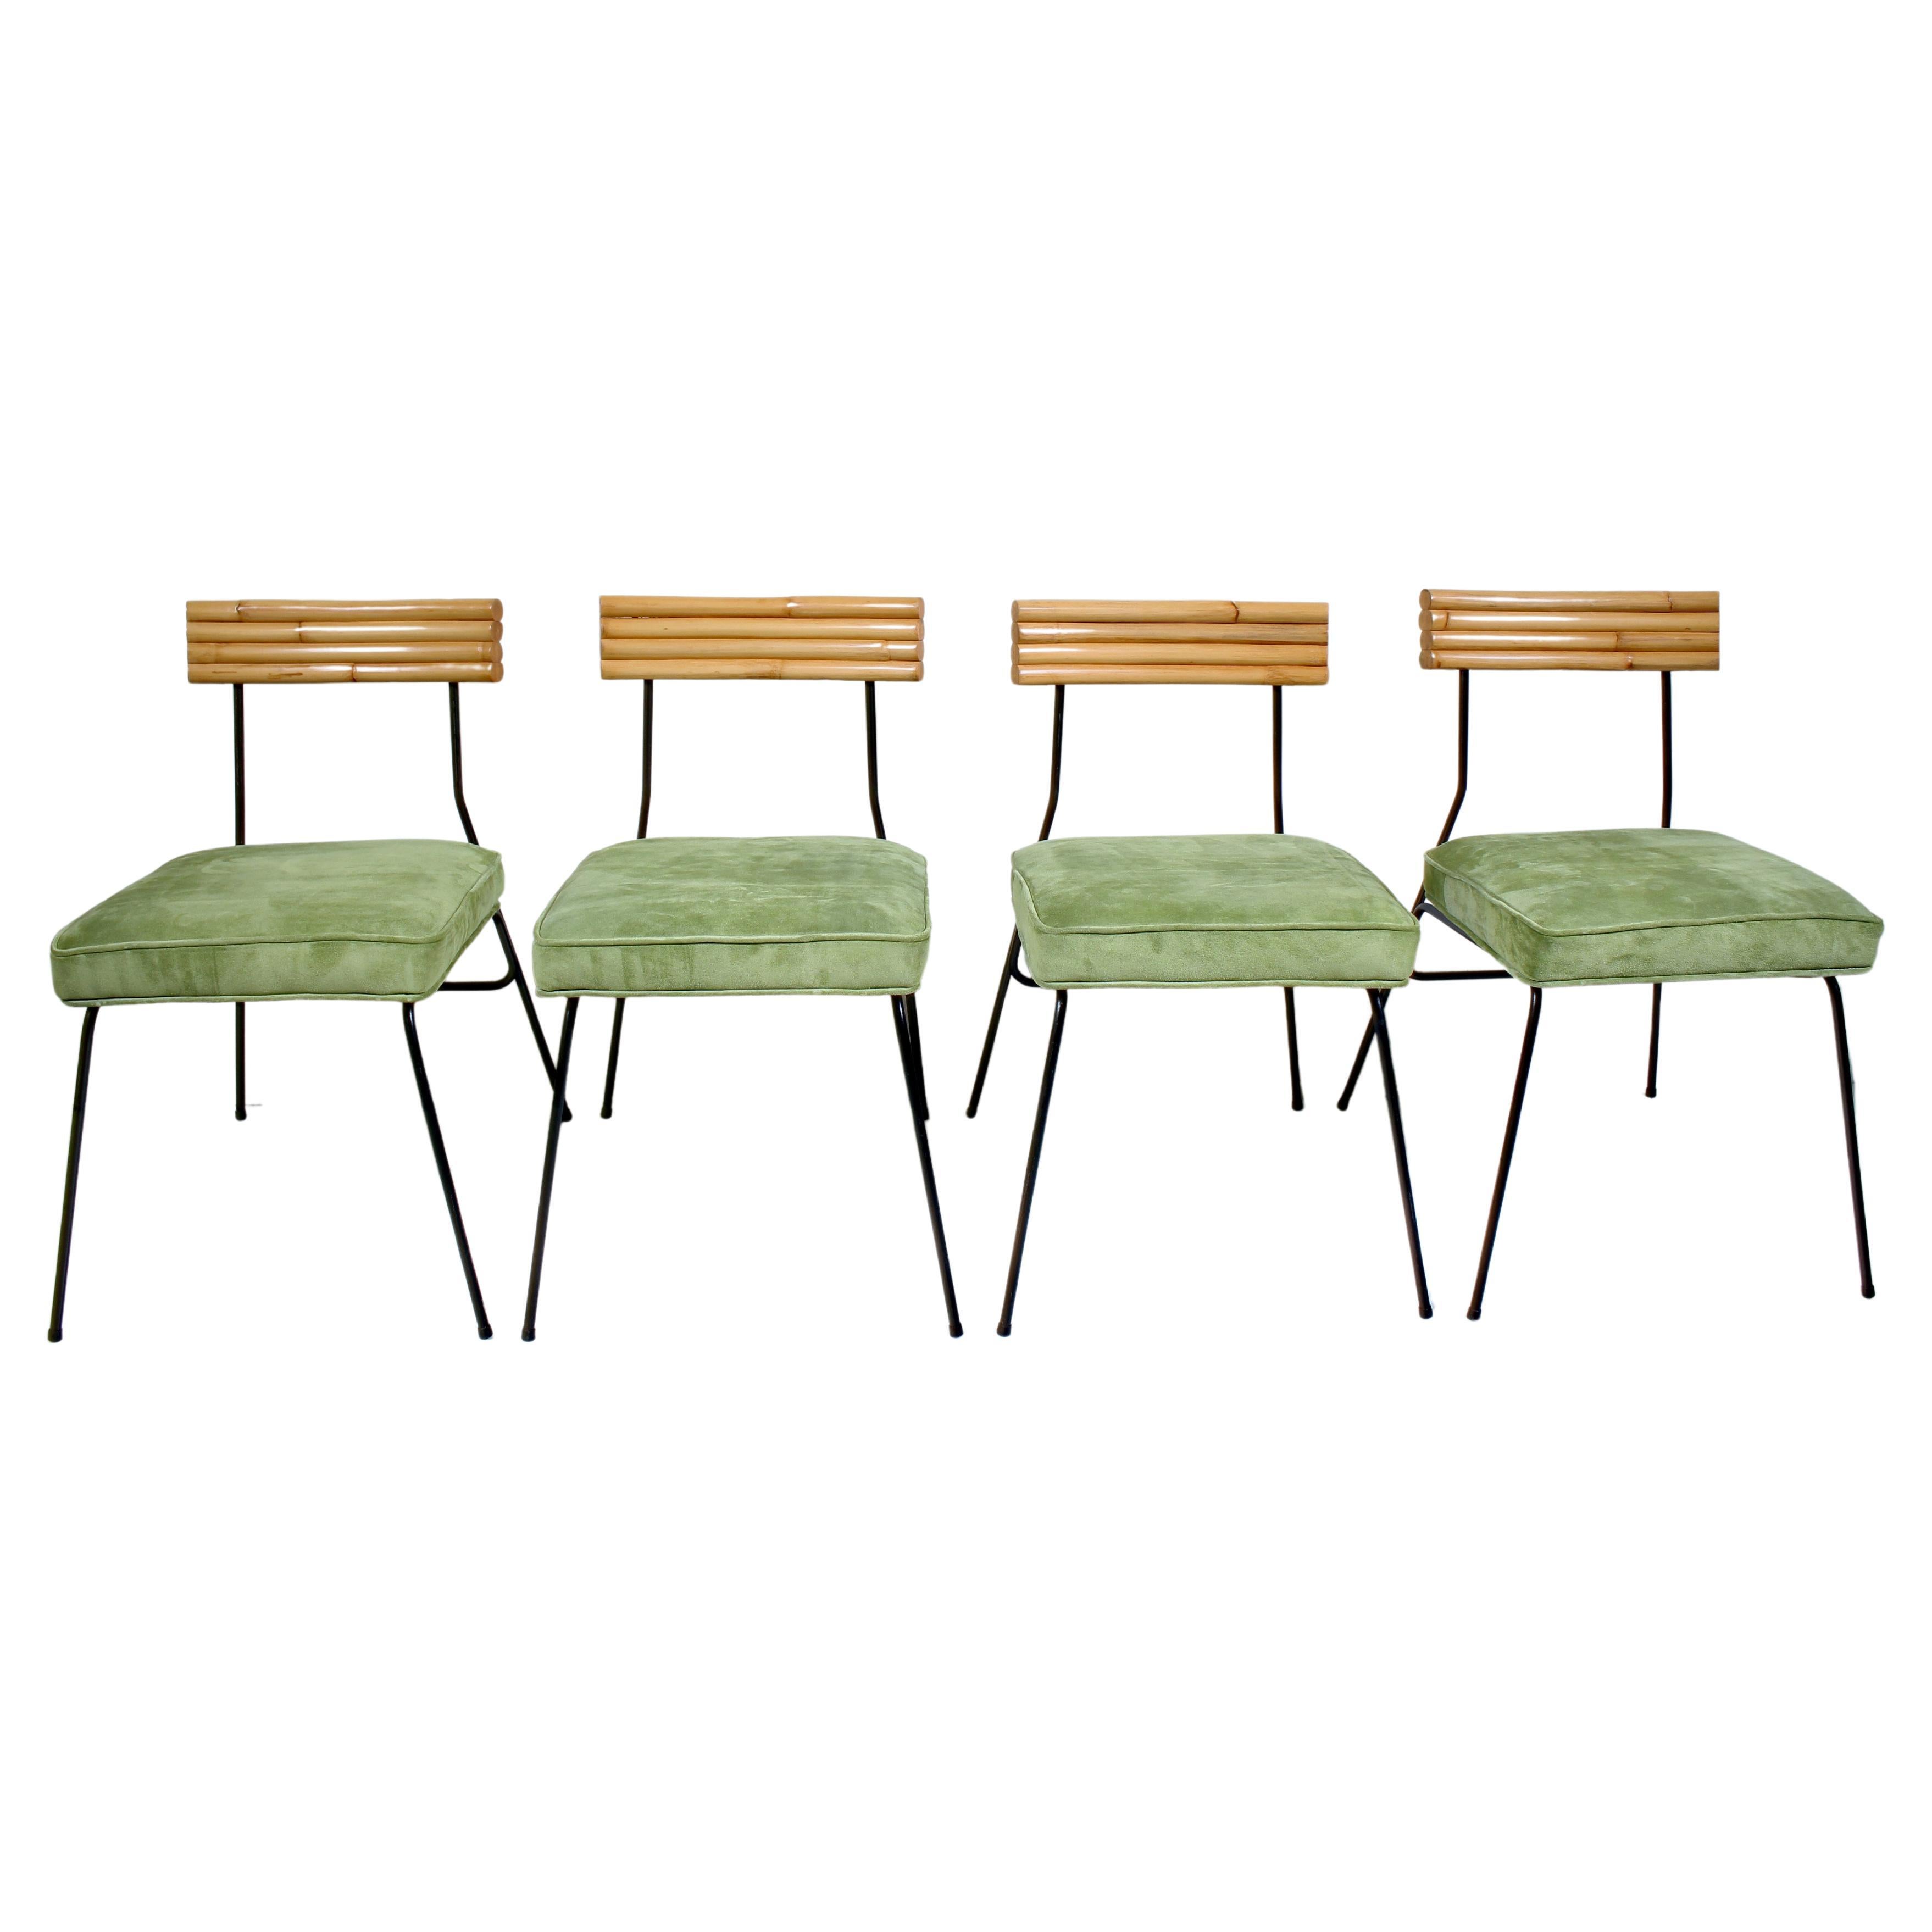 Set of 4 Herb & Shirley Ritts Iron, Bamboo & Suede Dining Side Chairs, 1950s For Sale